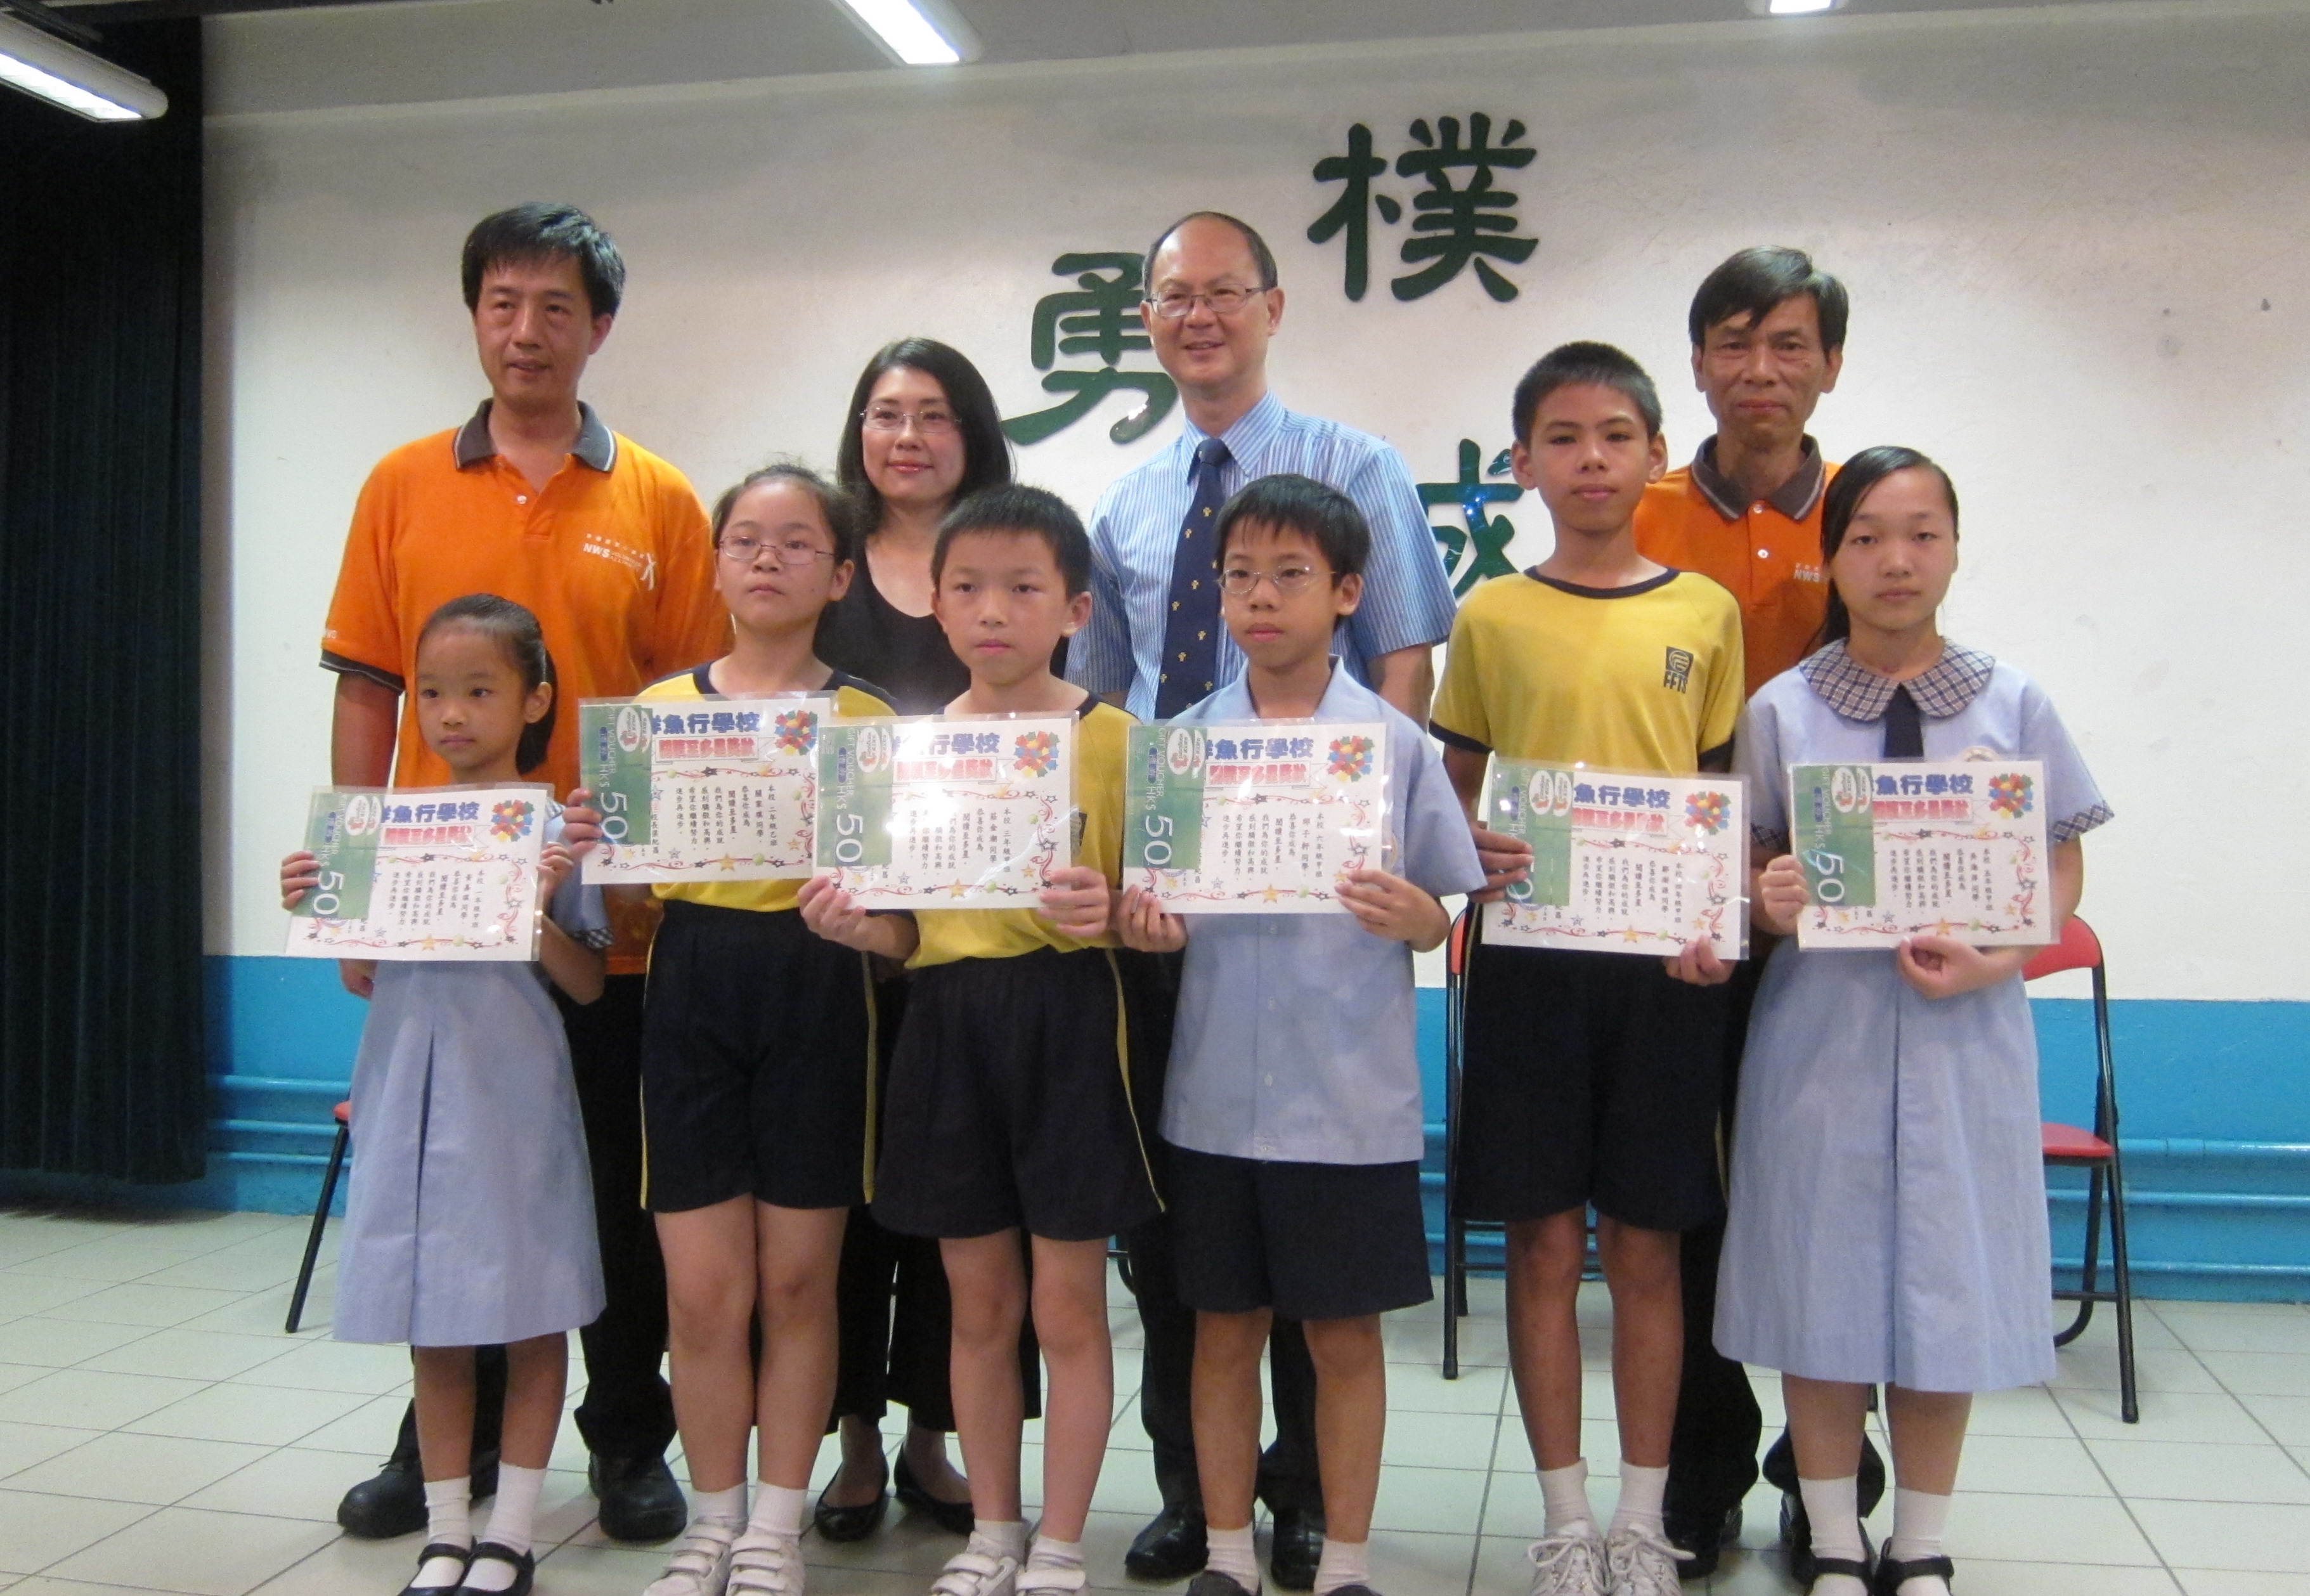 Coupons donation to Fresh Fish Traders' School (Chinese version only)